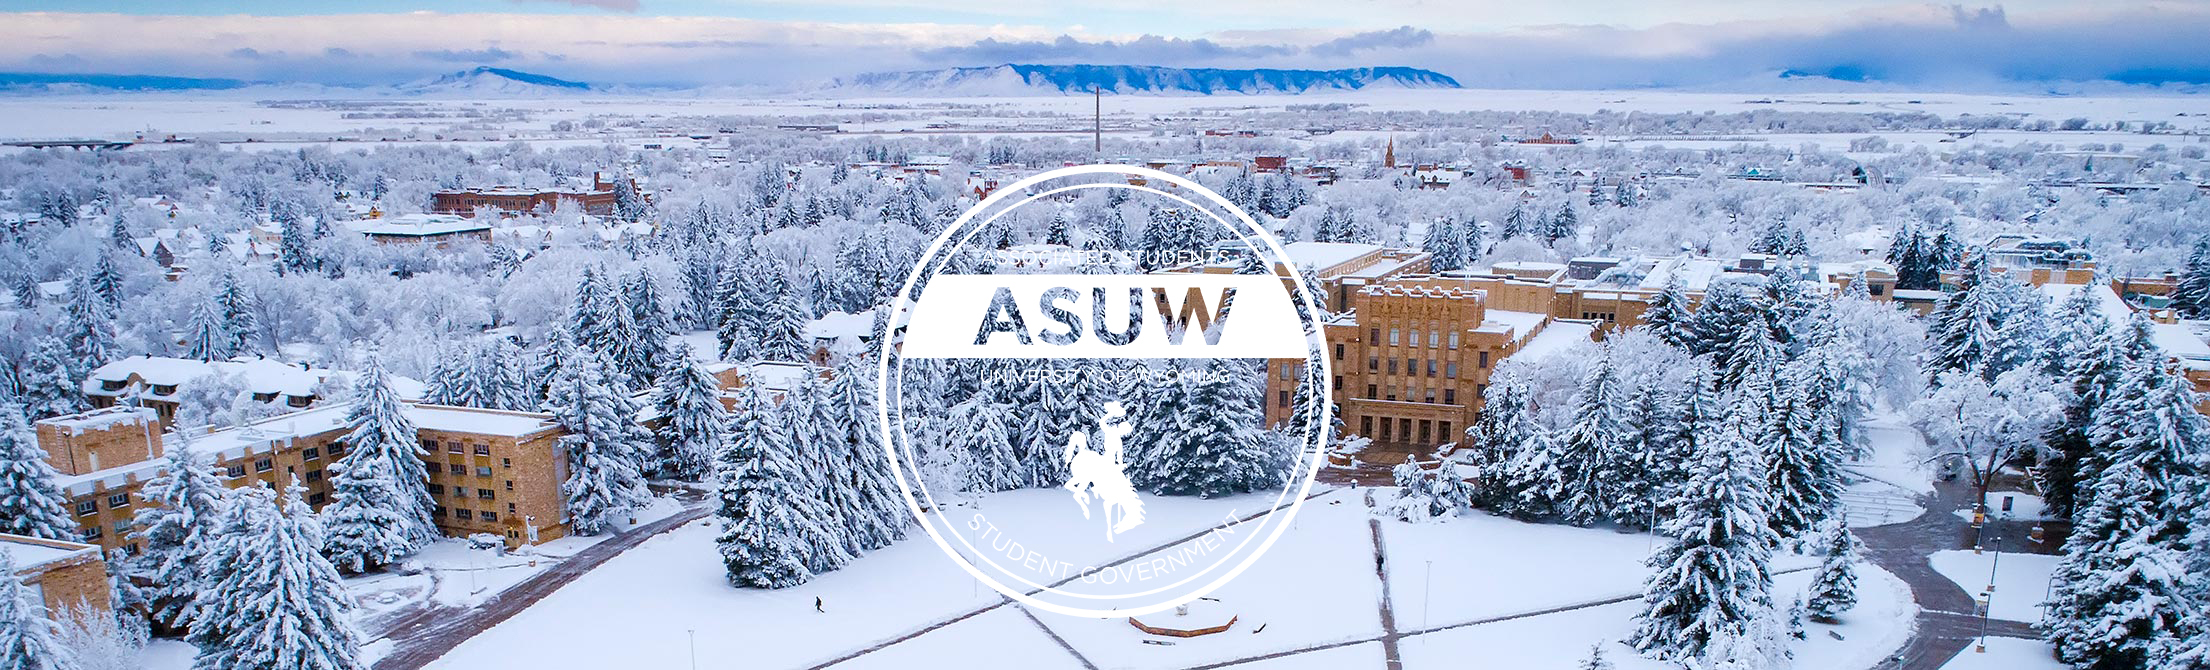 Aerial view of snowy campus with ASUW logo